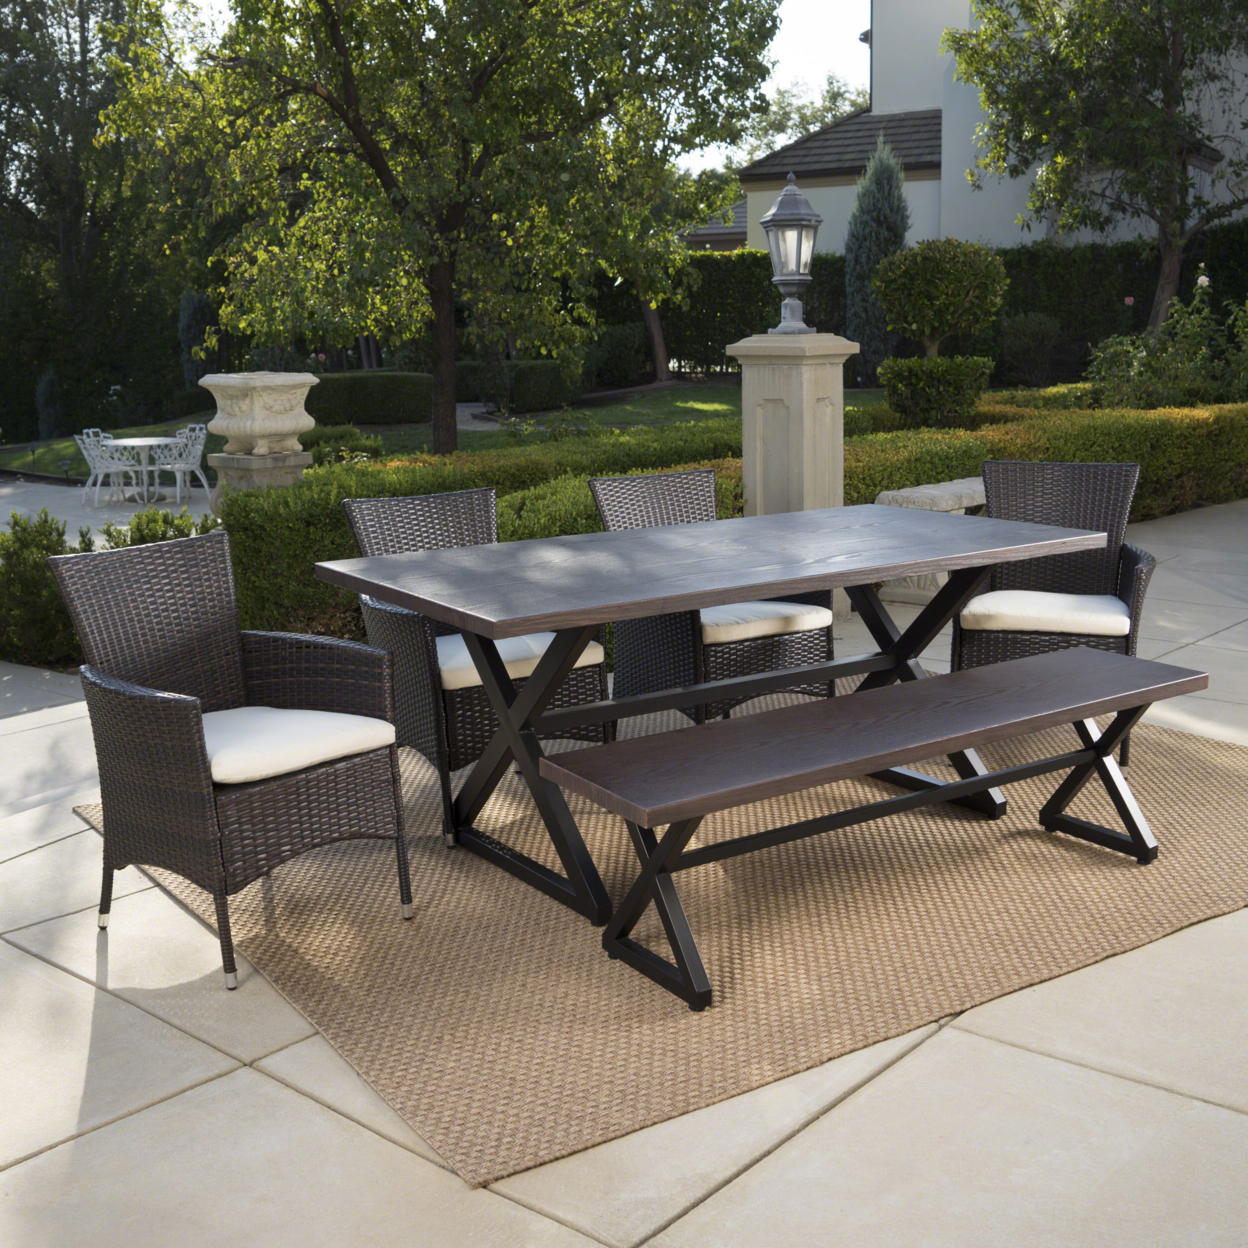 Owenburg Outdoor 6 Piece Aluminum Dining Set With Bench And Wicker Dining Chairs - Gray/Gray